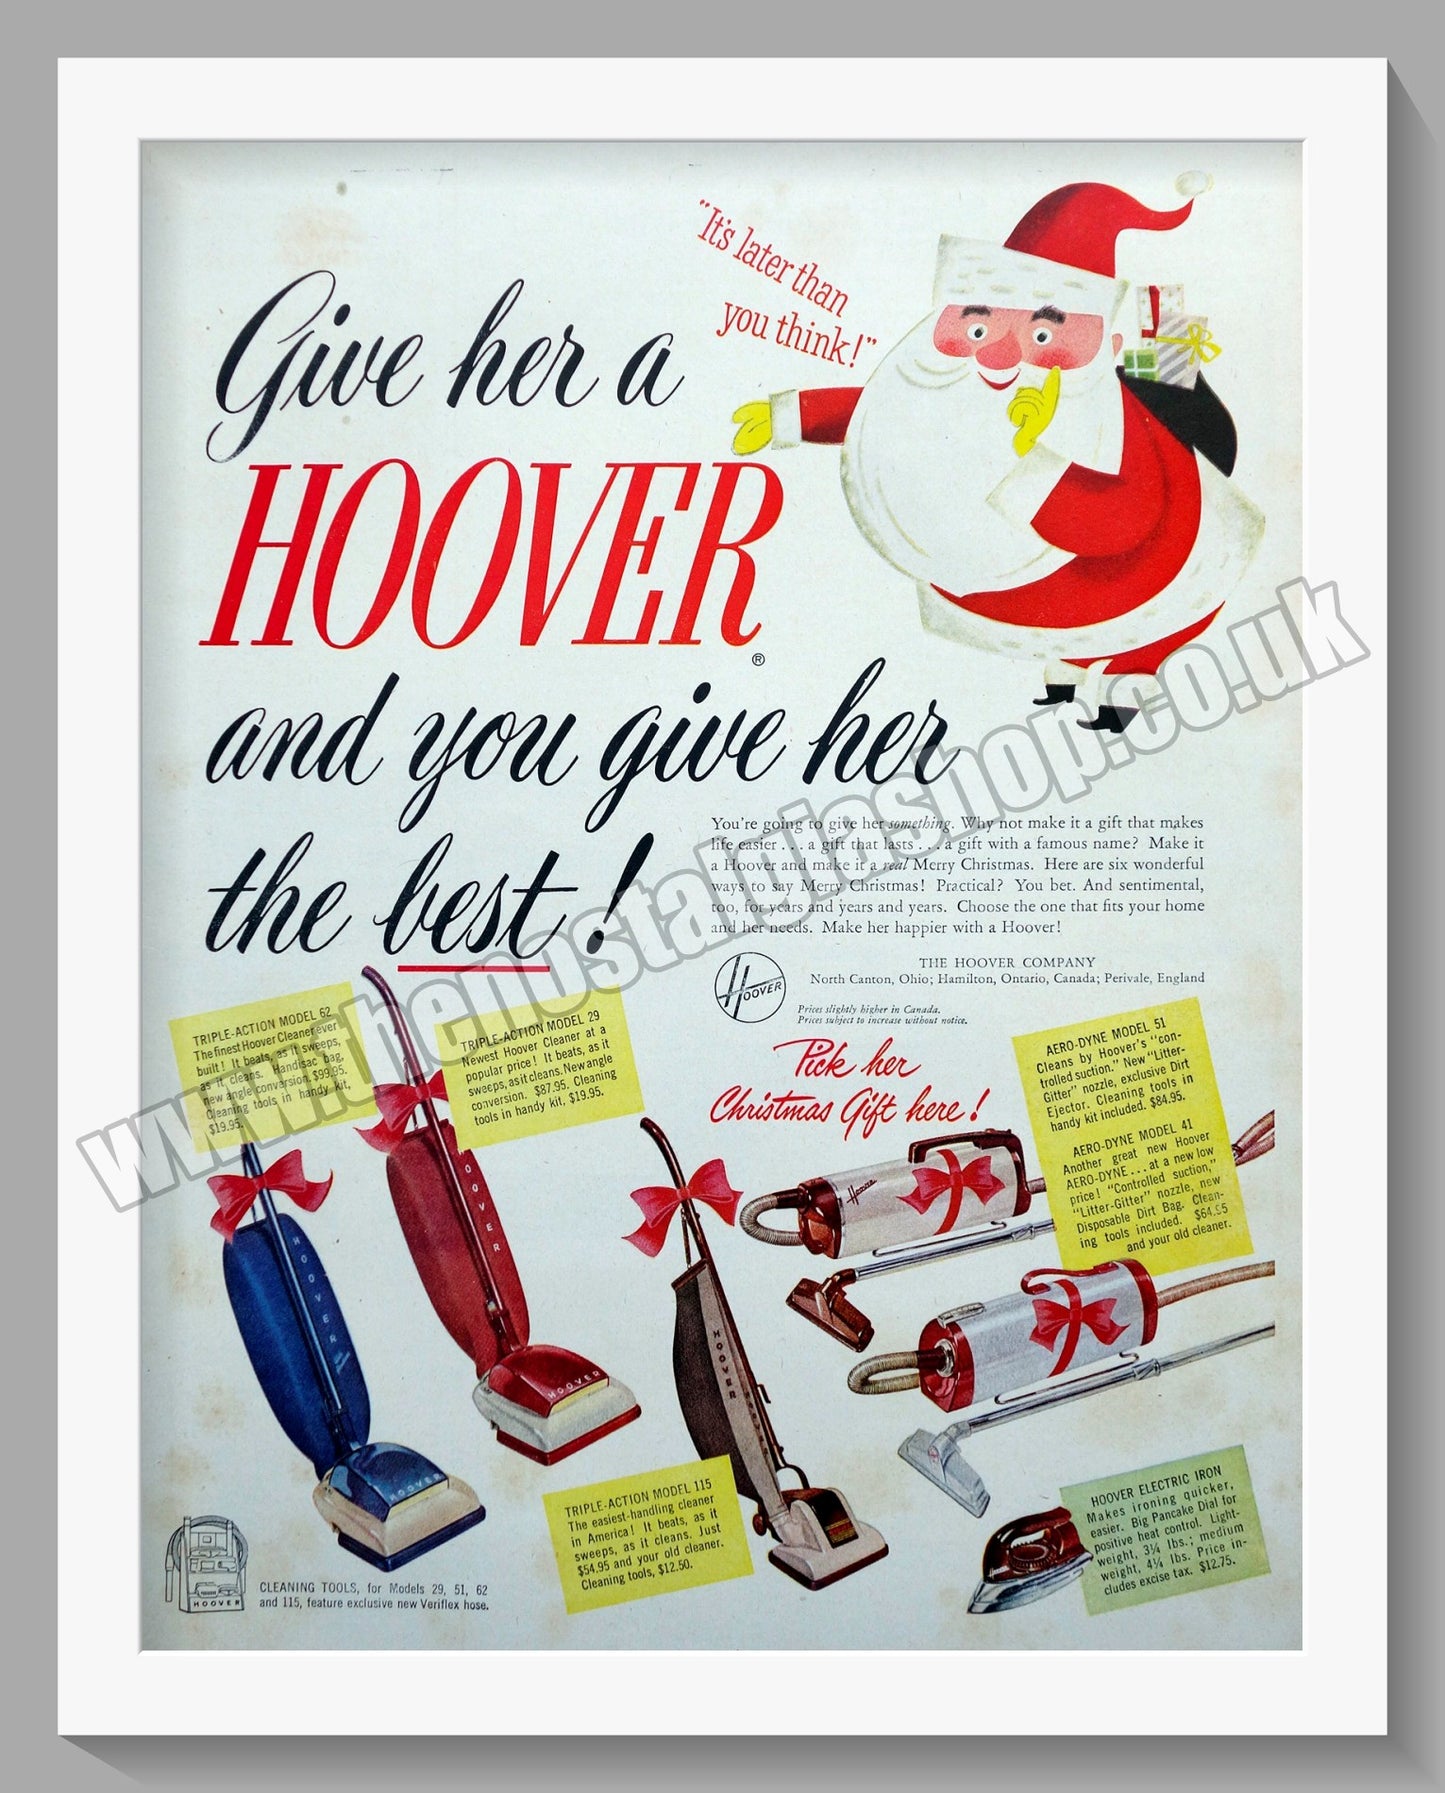 Hoover Vacuum Cleaners For Christmas! Original Advert 1950  (ref AD300904)